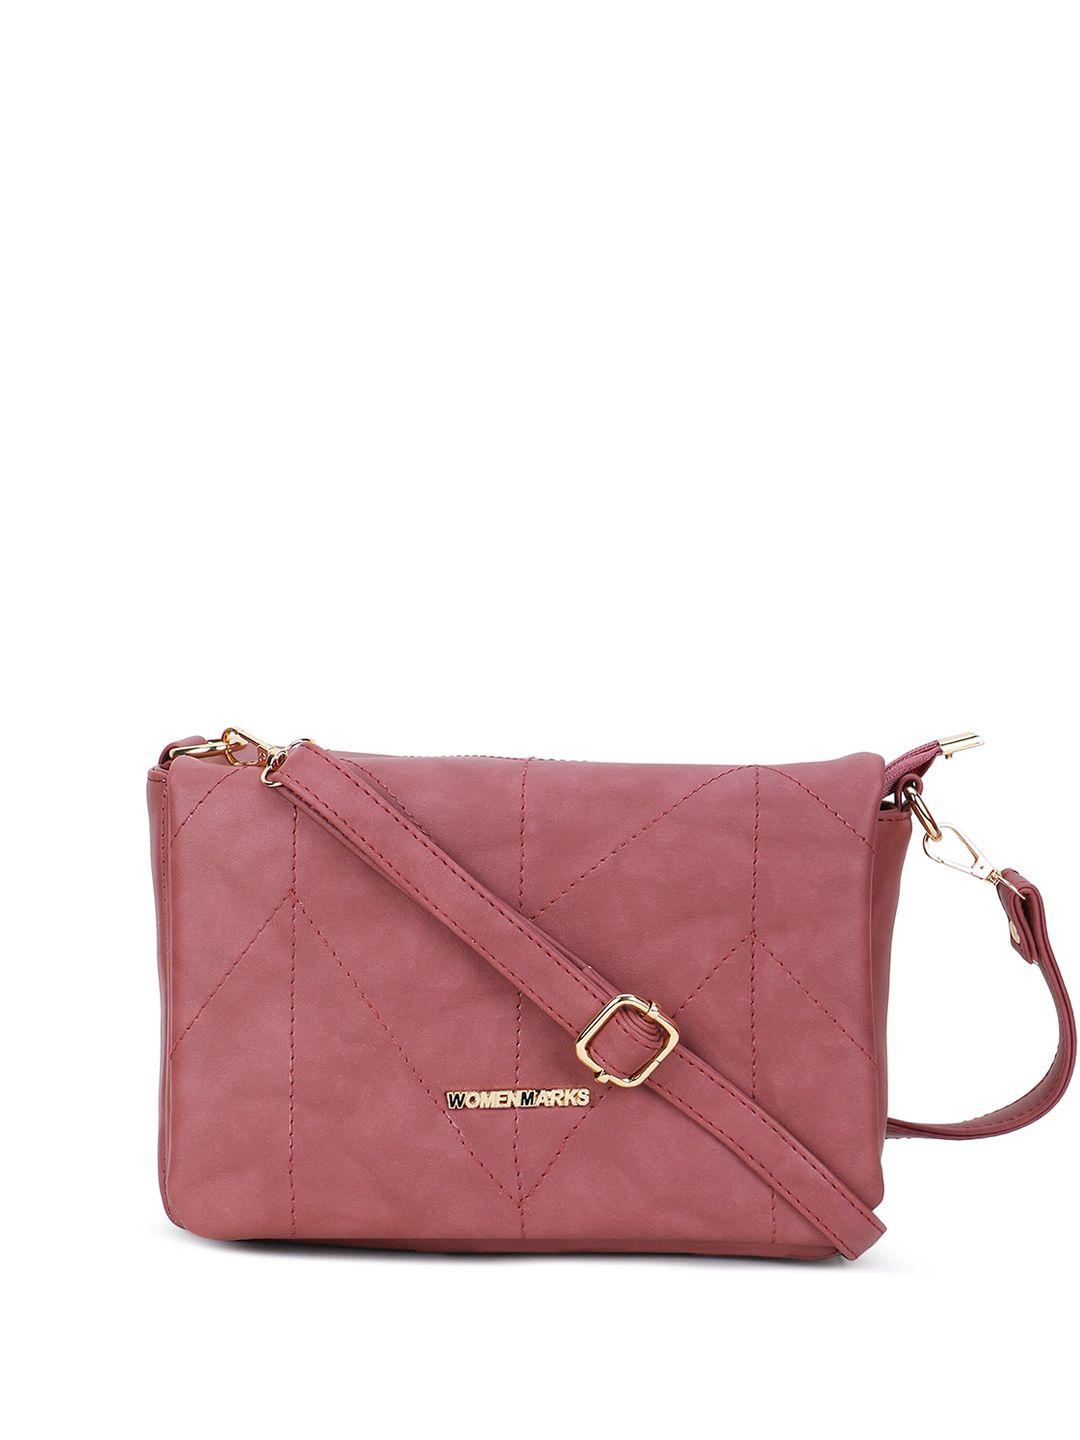 women marks quilted structured sling bag